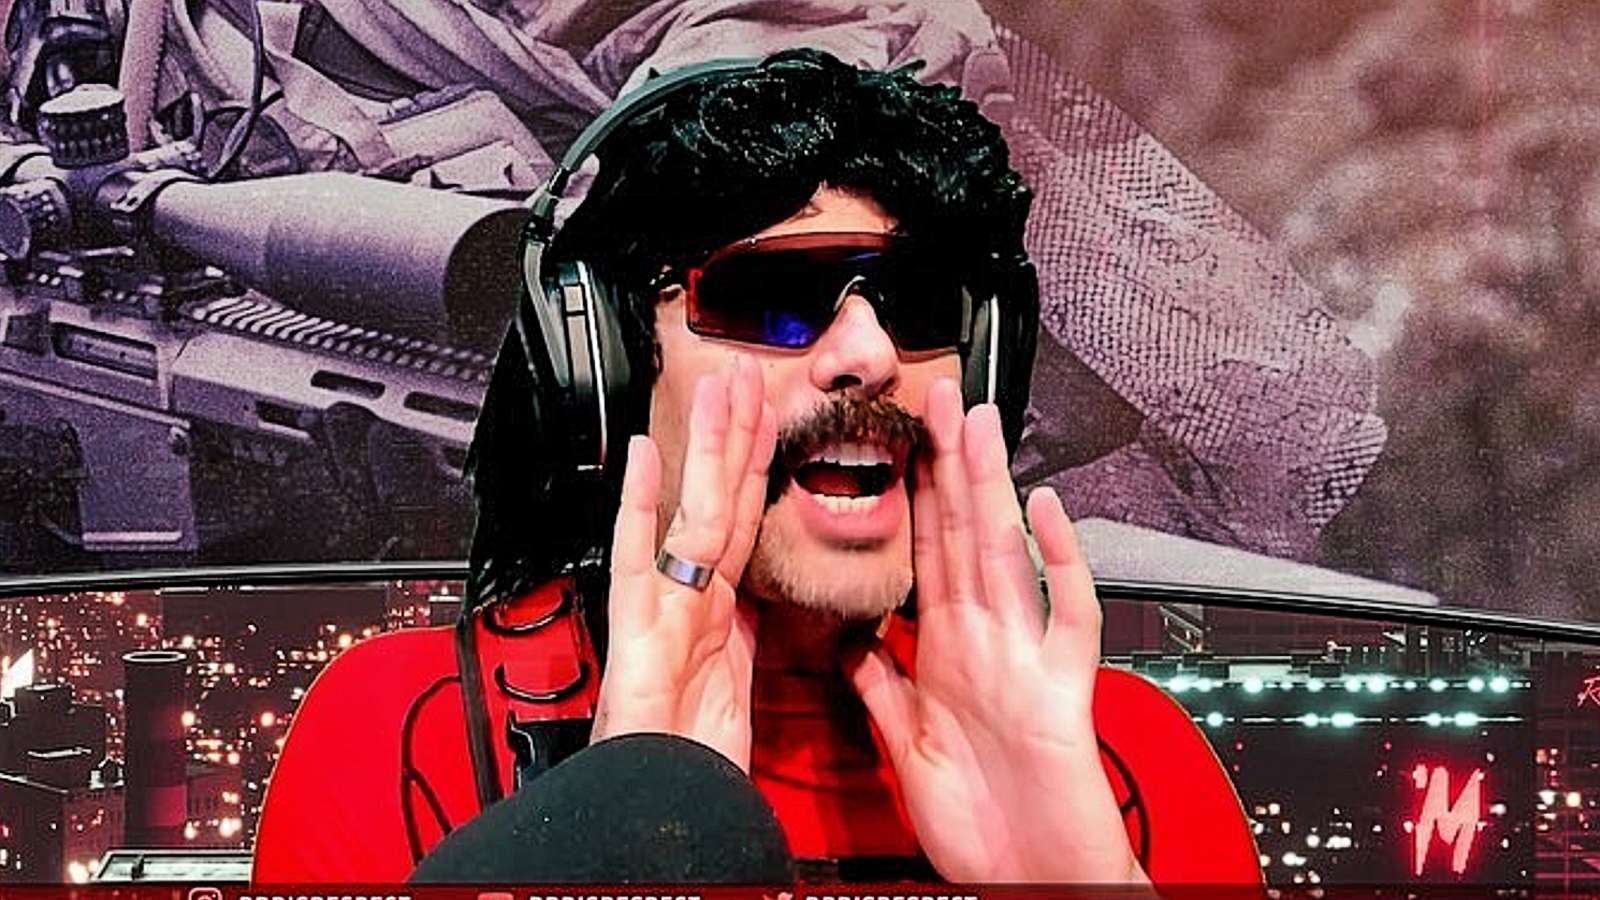 Dr Disrespect roasts fan for small donation